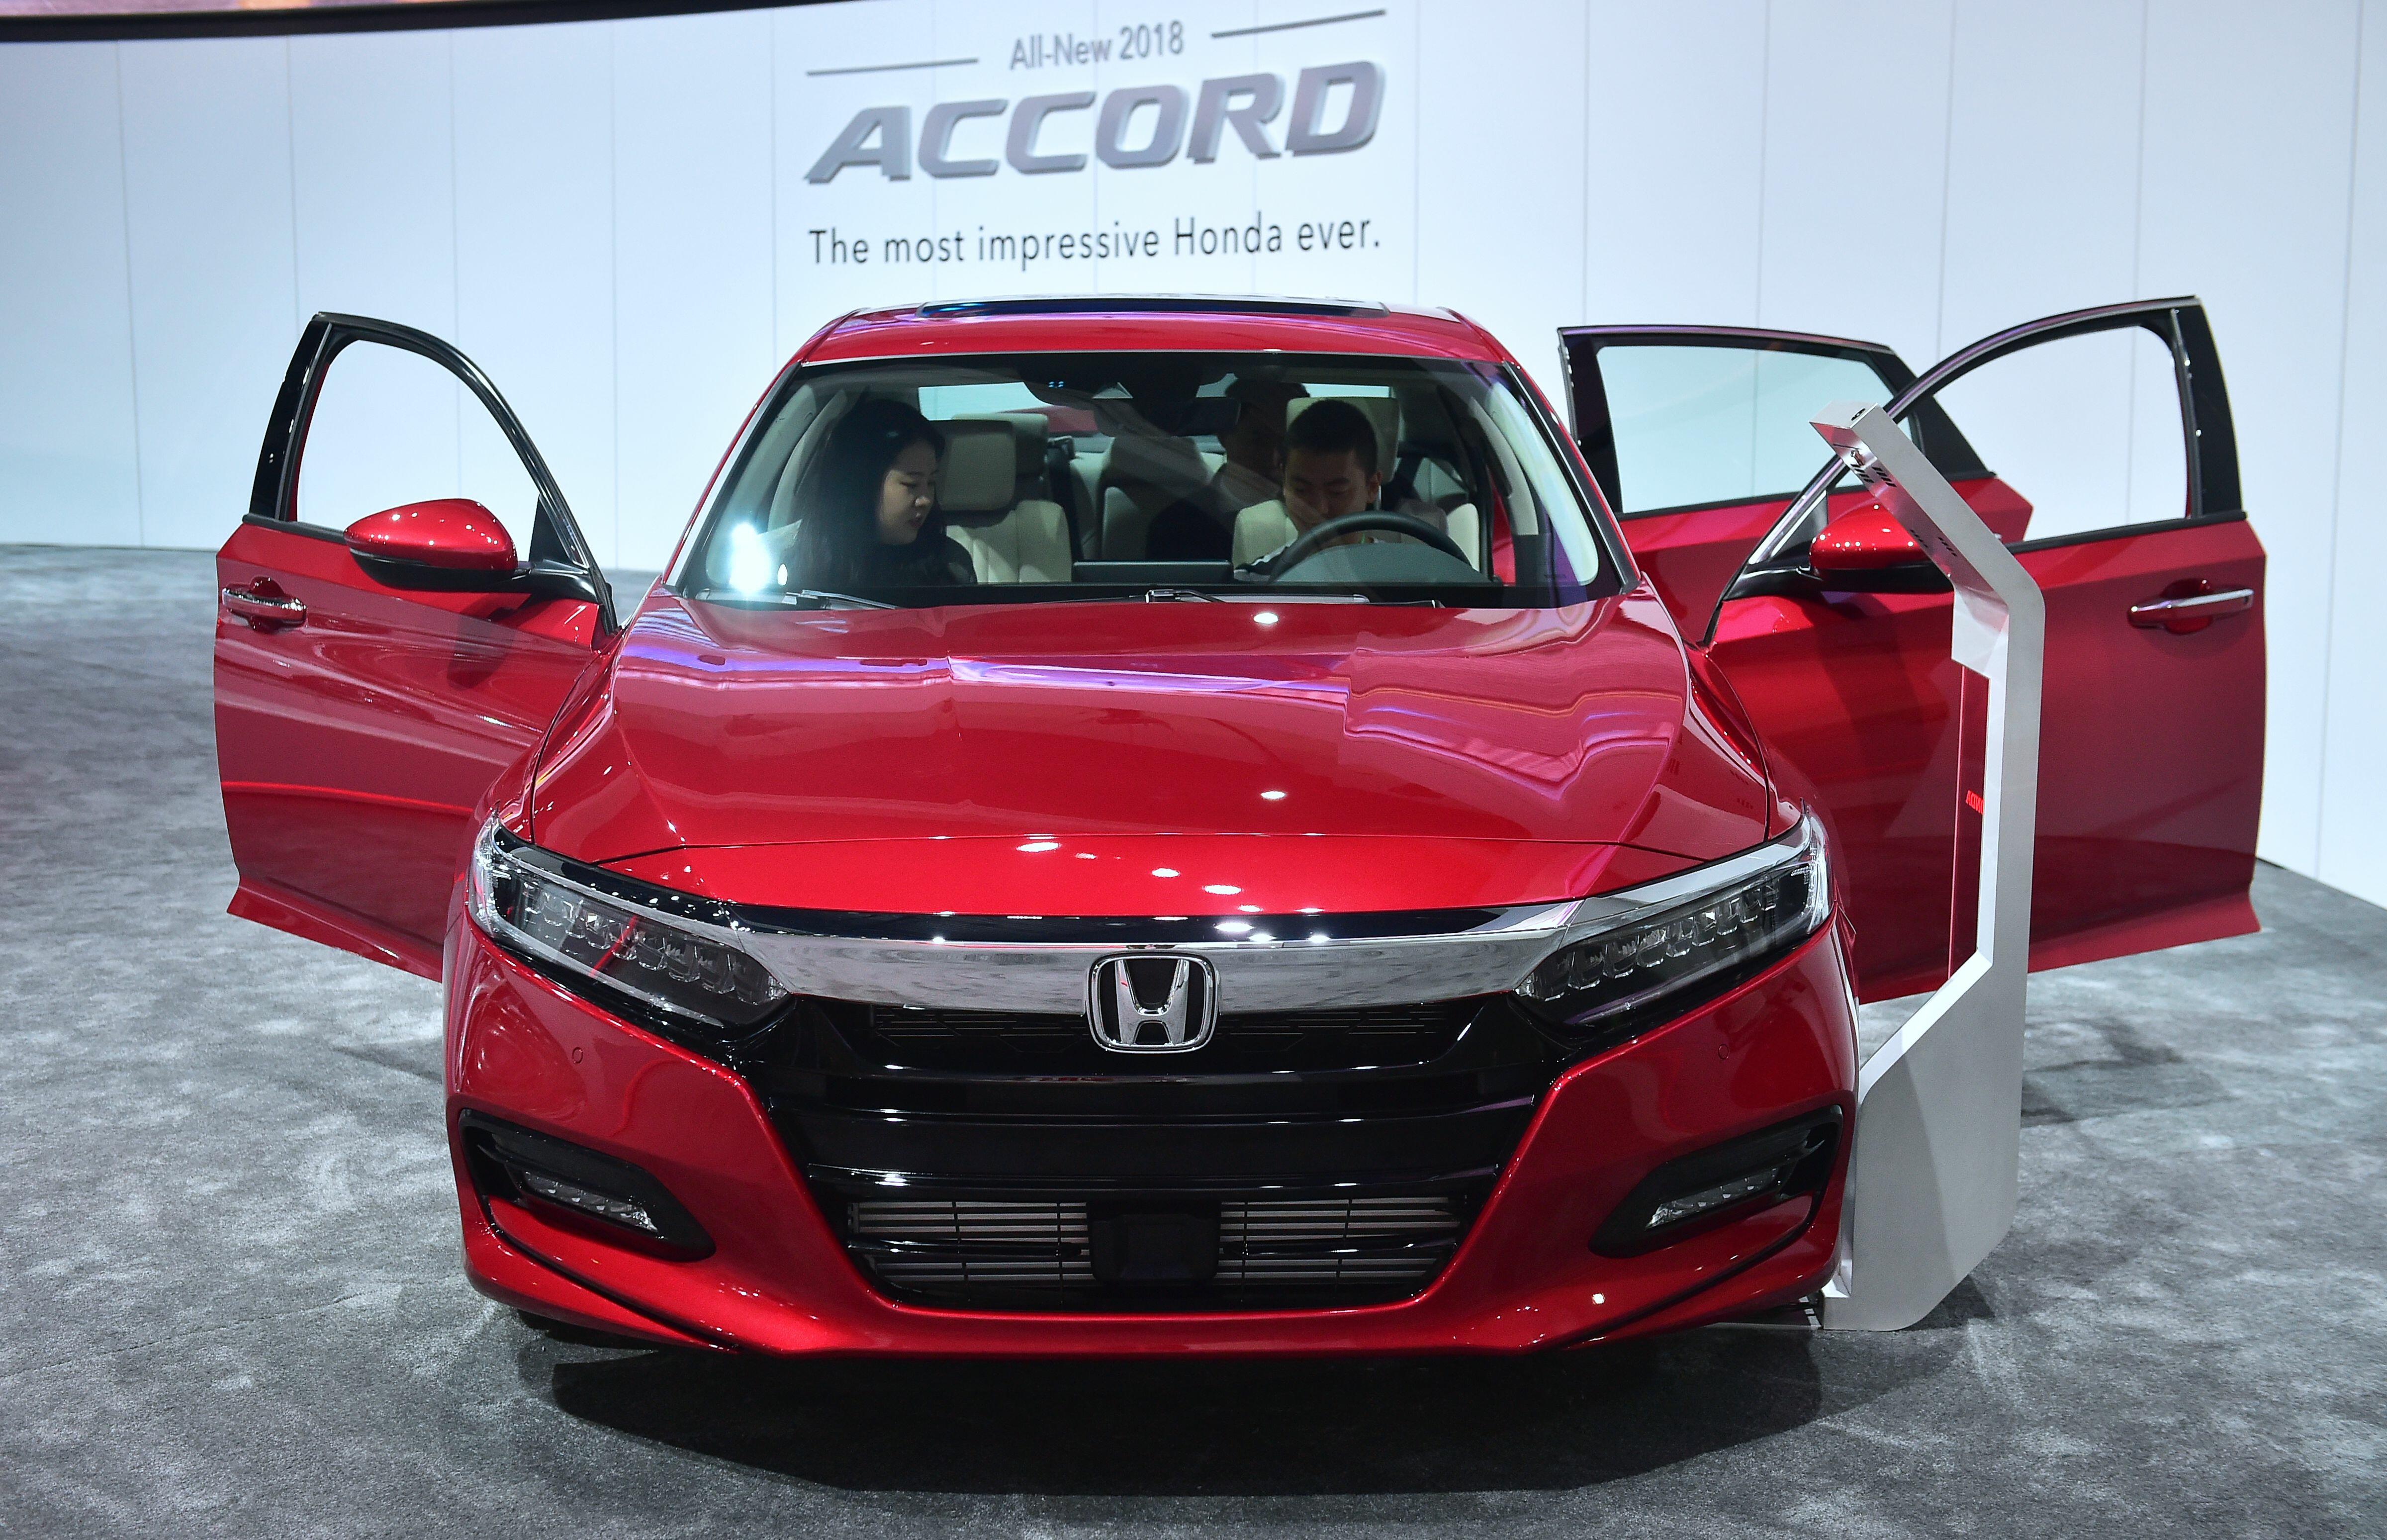 Honda Recalls 1.4 Million Vehicles Over Software Issues And Other